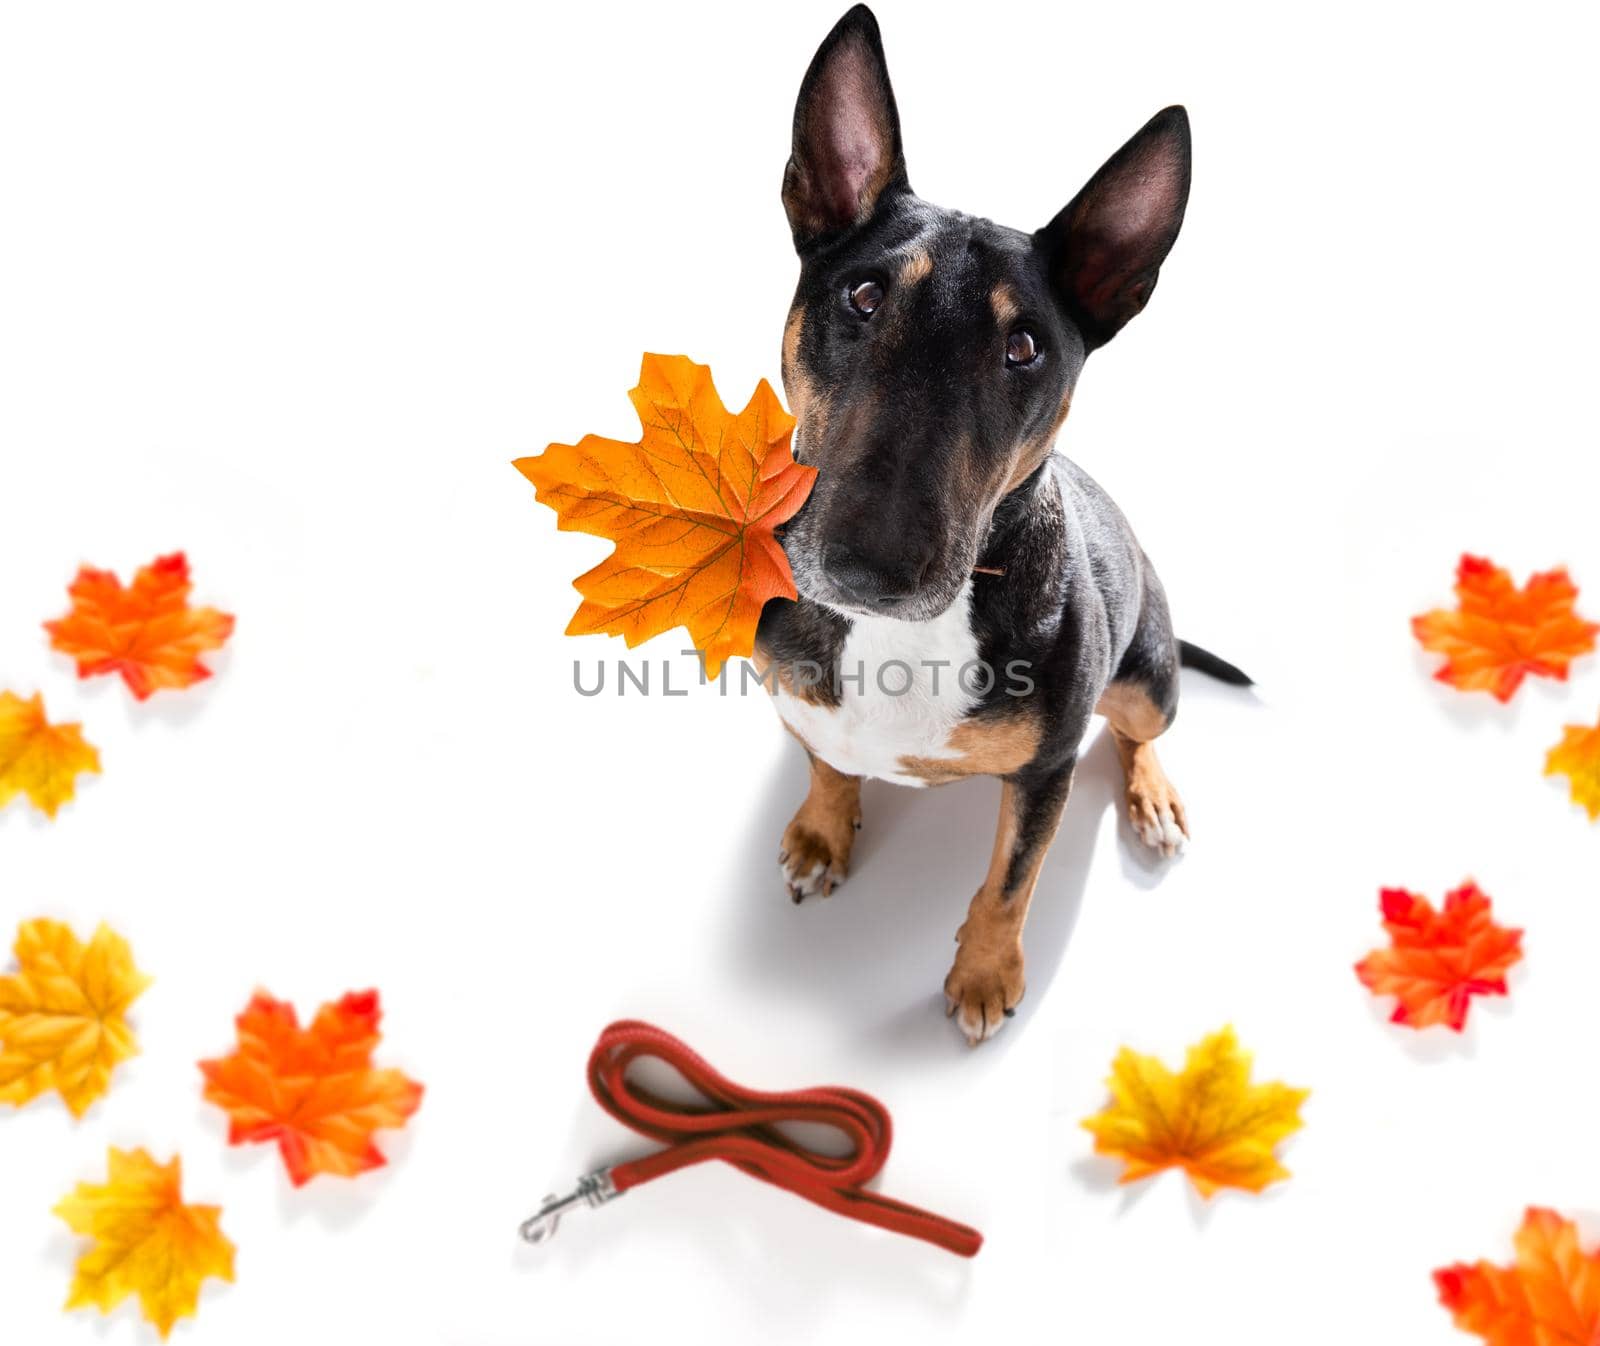 dog in atumn with leaf in mouth waiting to go for a walk with owner in fall, isolated on white background